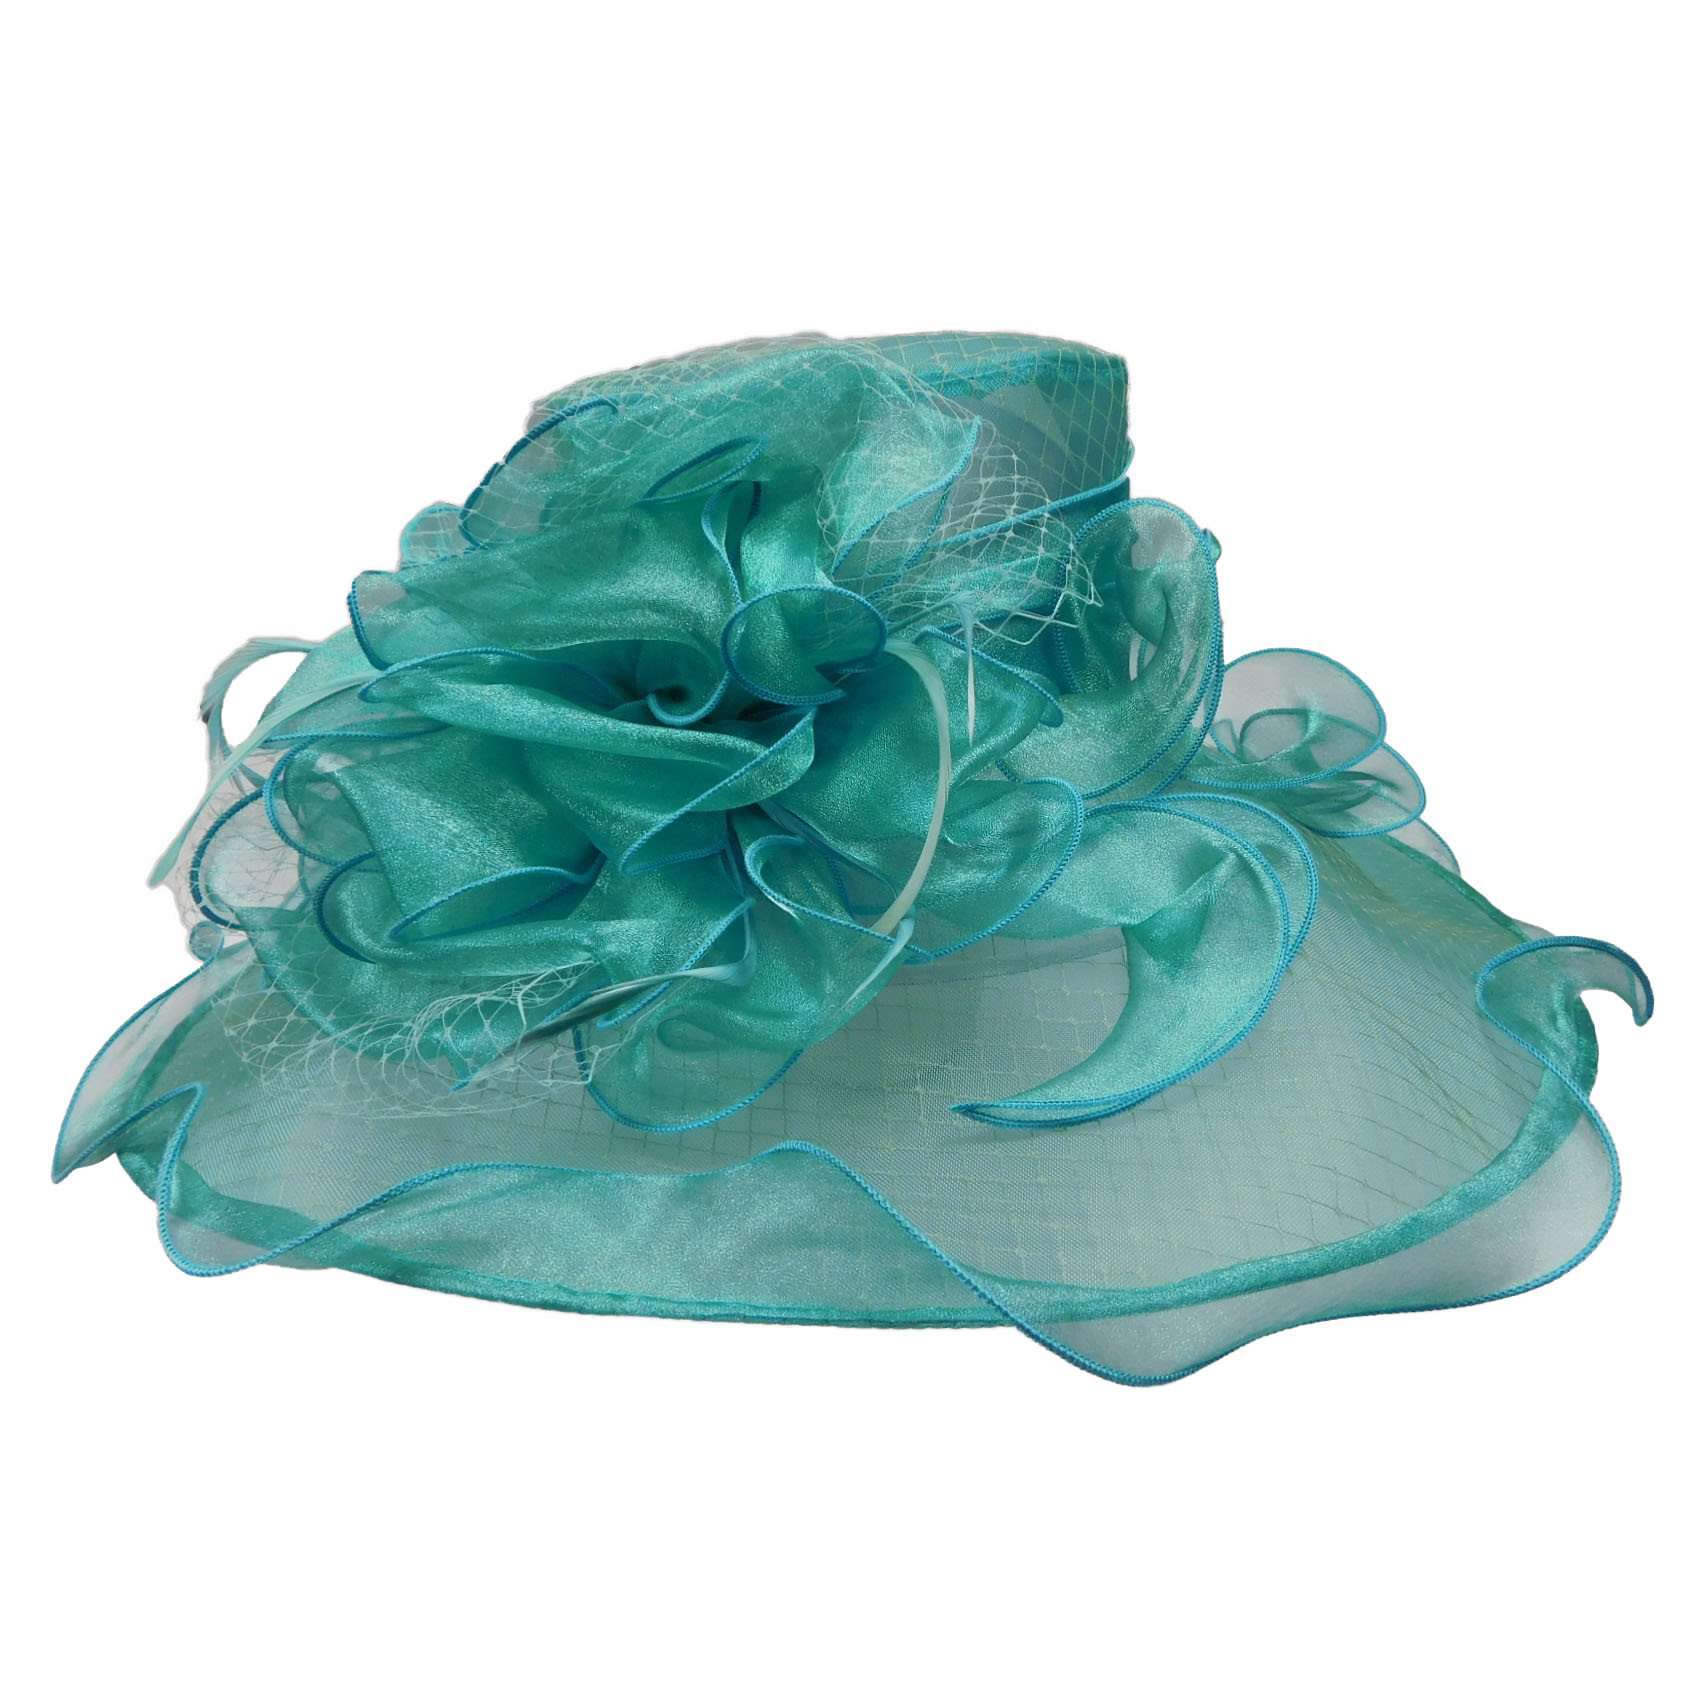 Organza Hat with Netting Overlay, Dress Hat - SetarTrading Hats 